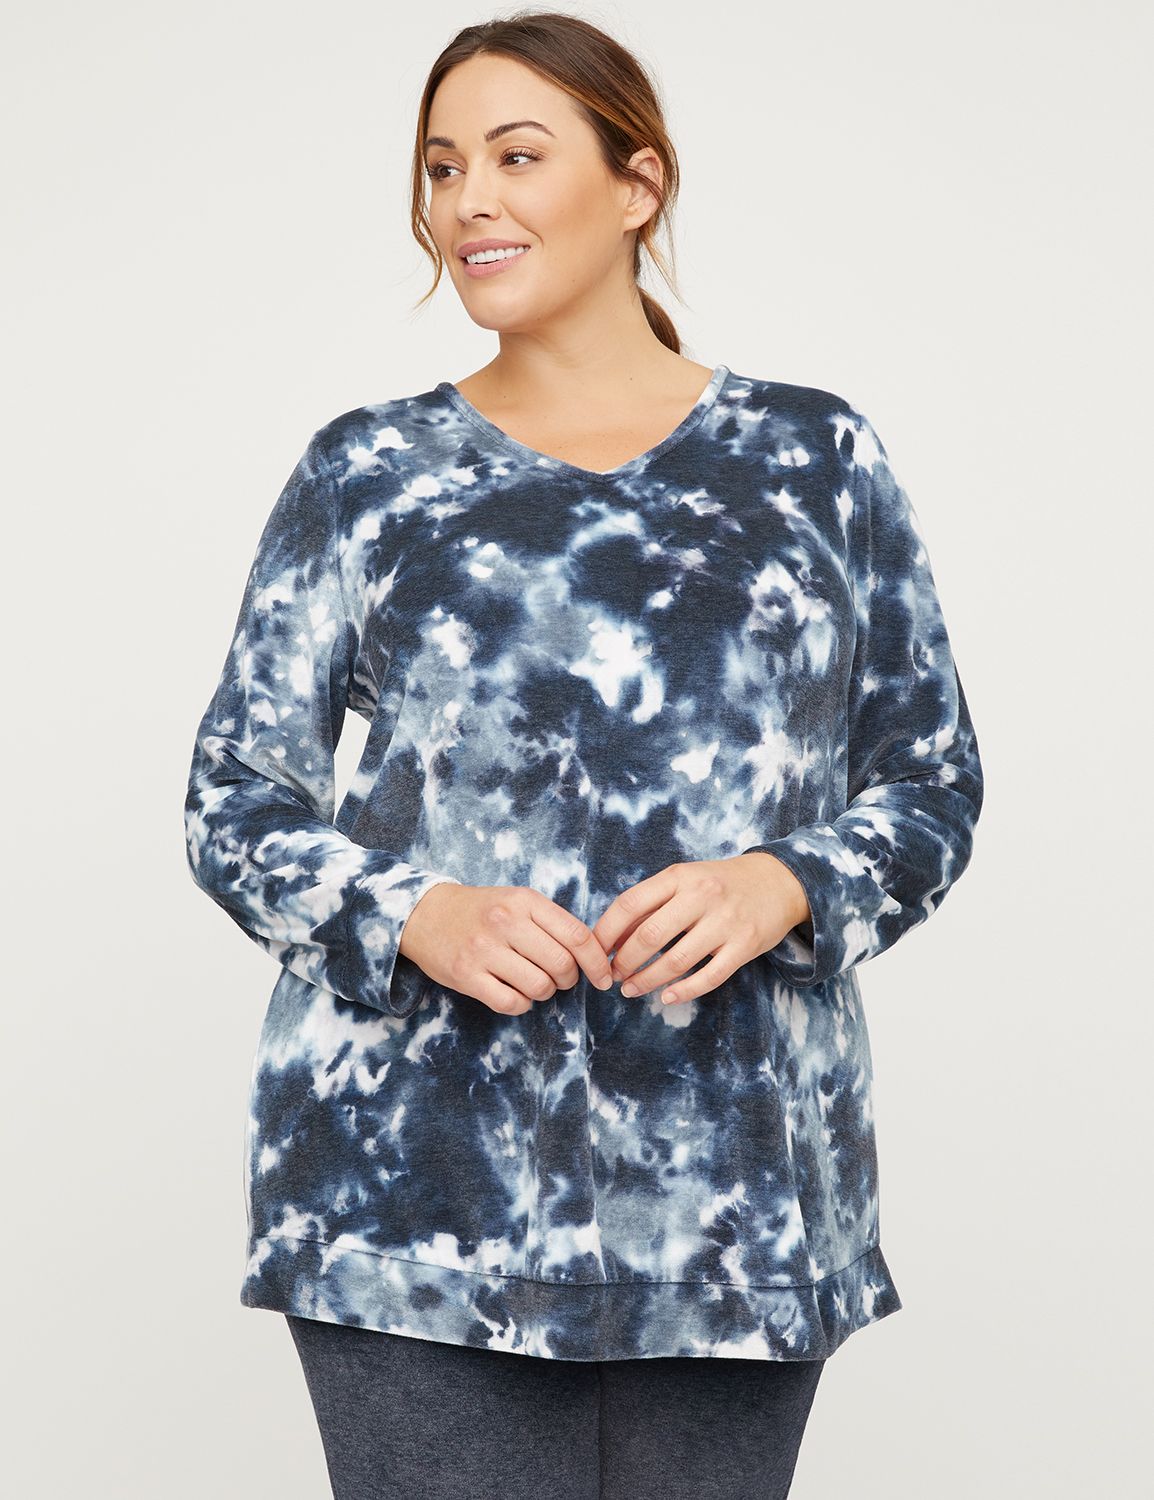 An easy-to-wear top that offers ultimate comfort and style. Featuring a tie-dye print in super-soft, super-cozy velour. Double V-neck with crisscross straps at the back. Long sleeves. Longer length for added coverage and comfort. Banded edge at cuffs and hem. Item Number #316076, 61% Polyester/39% Rayon, Machine Wash, Imported Plus Size Activewear, Length: 30" , Petite Length: 28" , Plus Sizes 0X-5X, Petite Plus Sizes 0XWP-3XWP, Catherines Plus Sizes